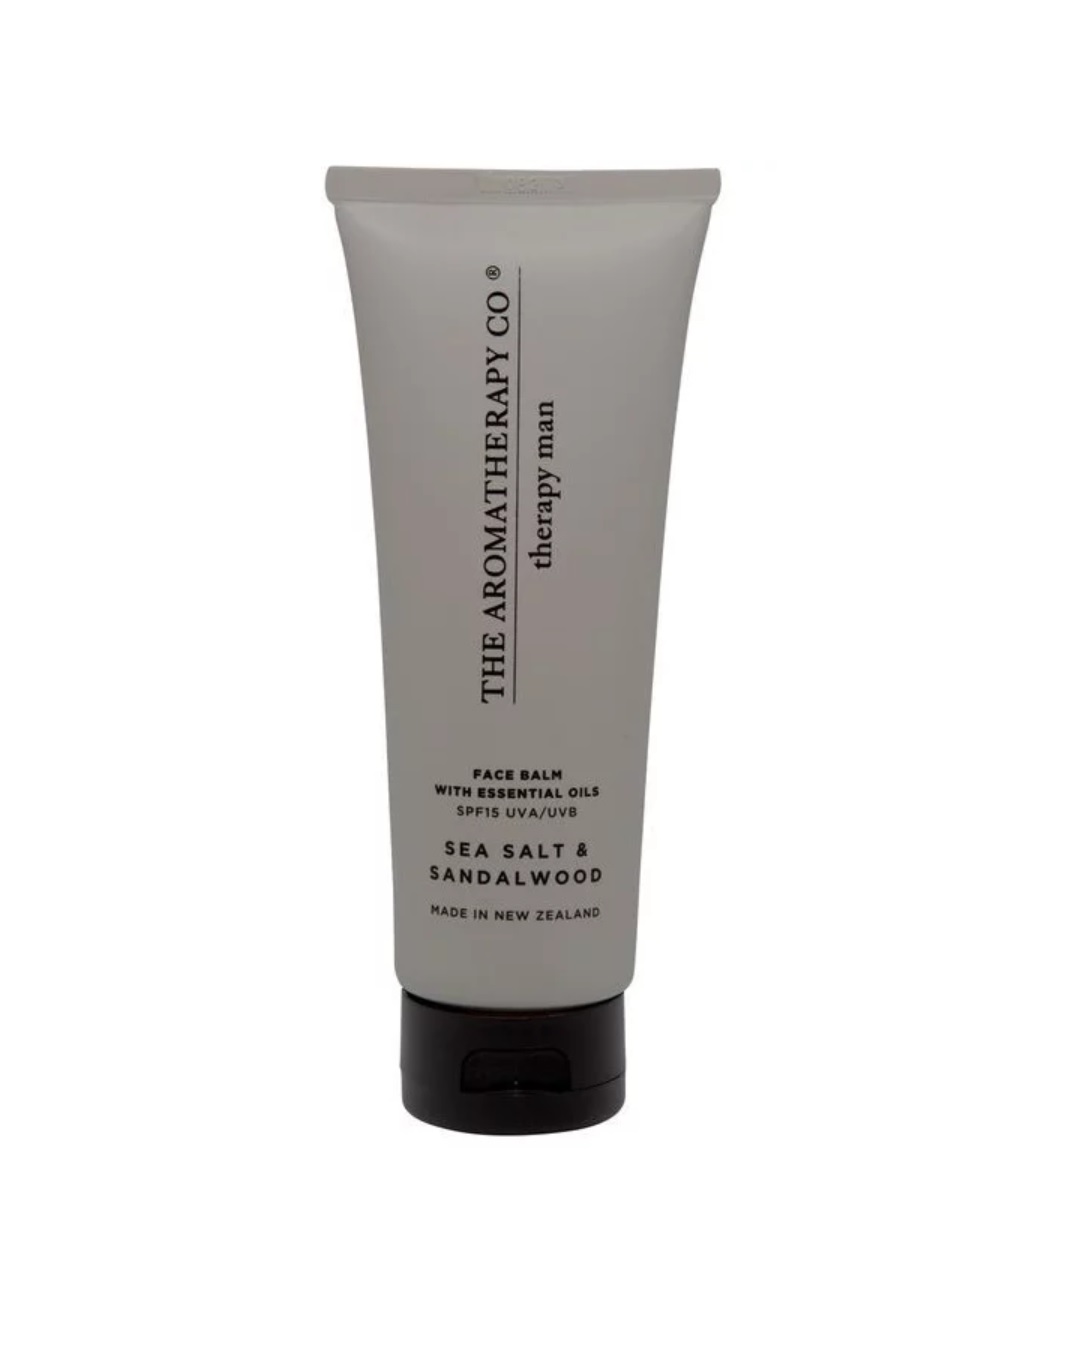 Therapy man face balm in sandalwood and sea salt